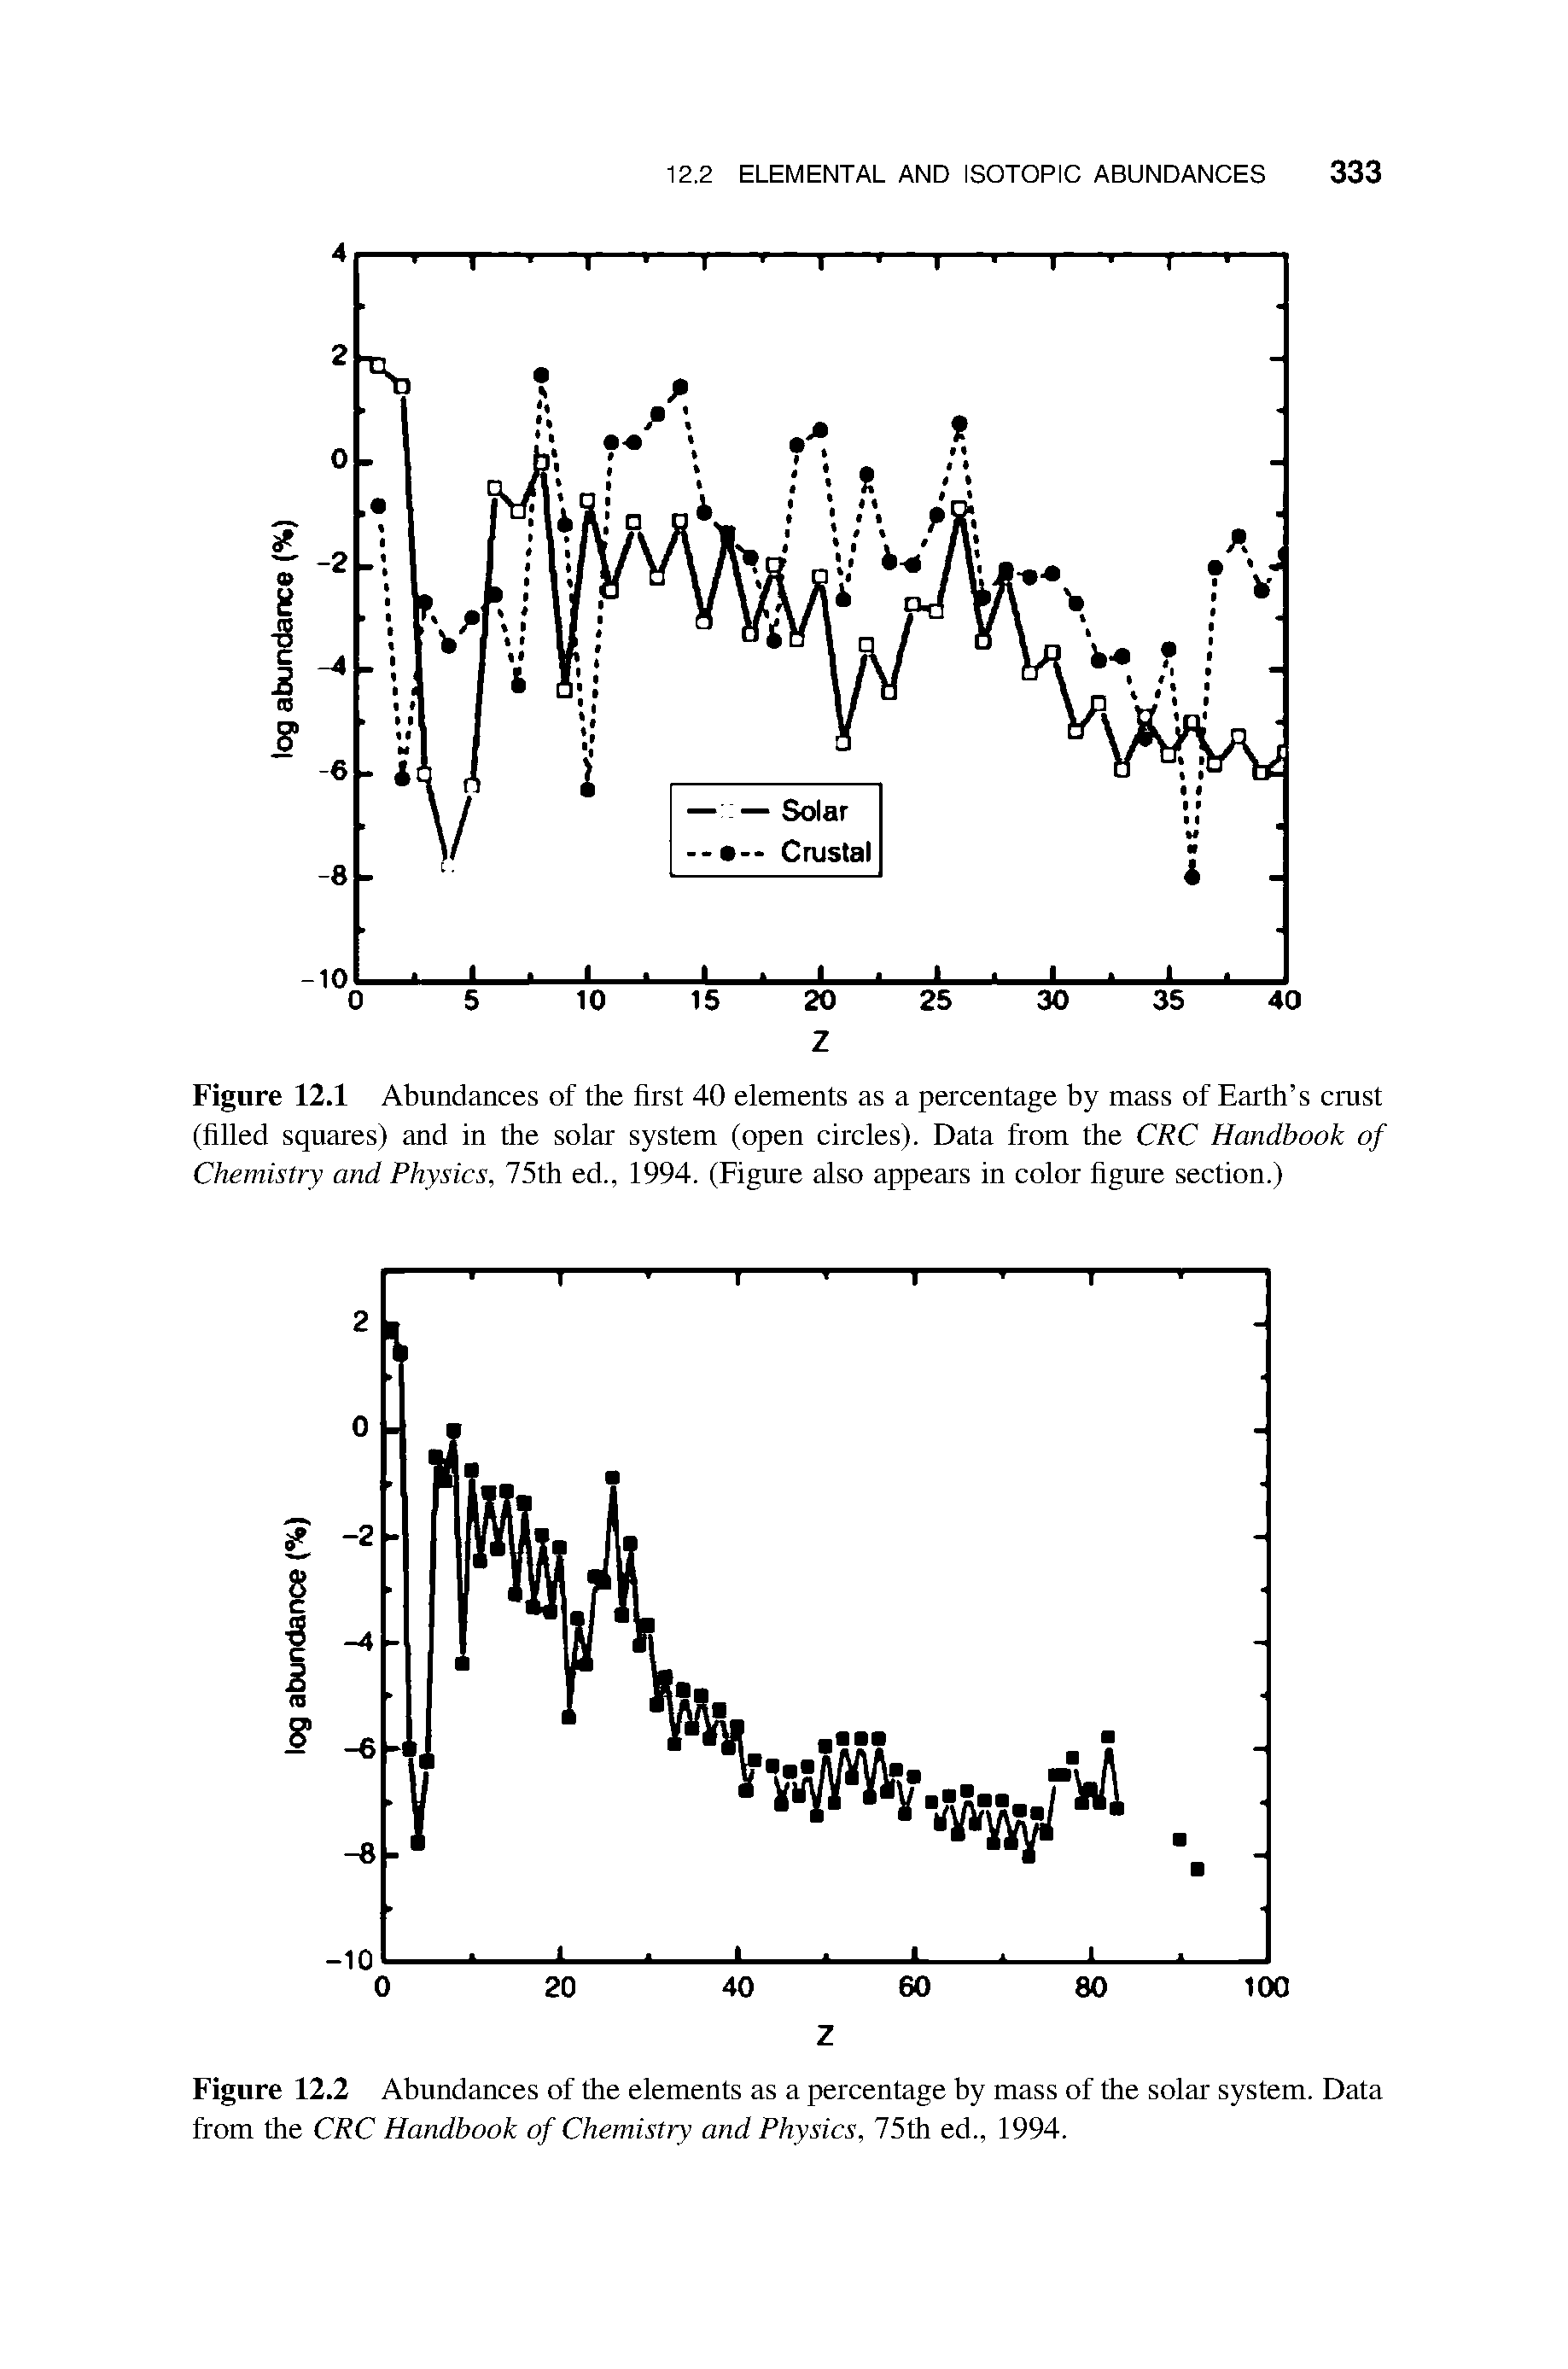 Figure 12.1 Abundances of the first 40 elements as a percentage by mass of Earth s crust (filled squares) and in the solar system (open circles). Data from the CRC Handbook of Chemistry and Physics, 75th ed., 1994. (Figure also appears in color figure section.)...